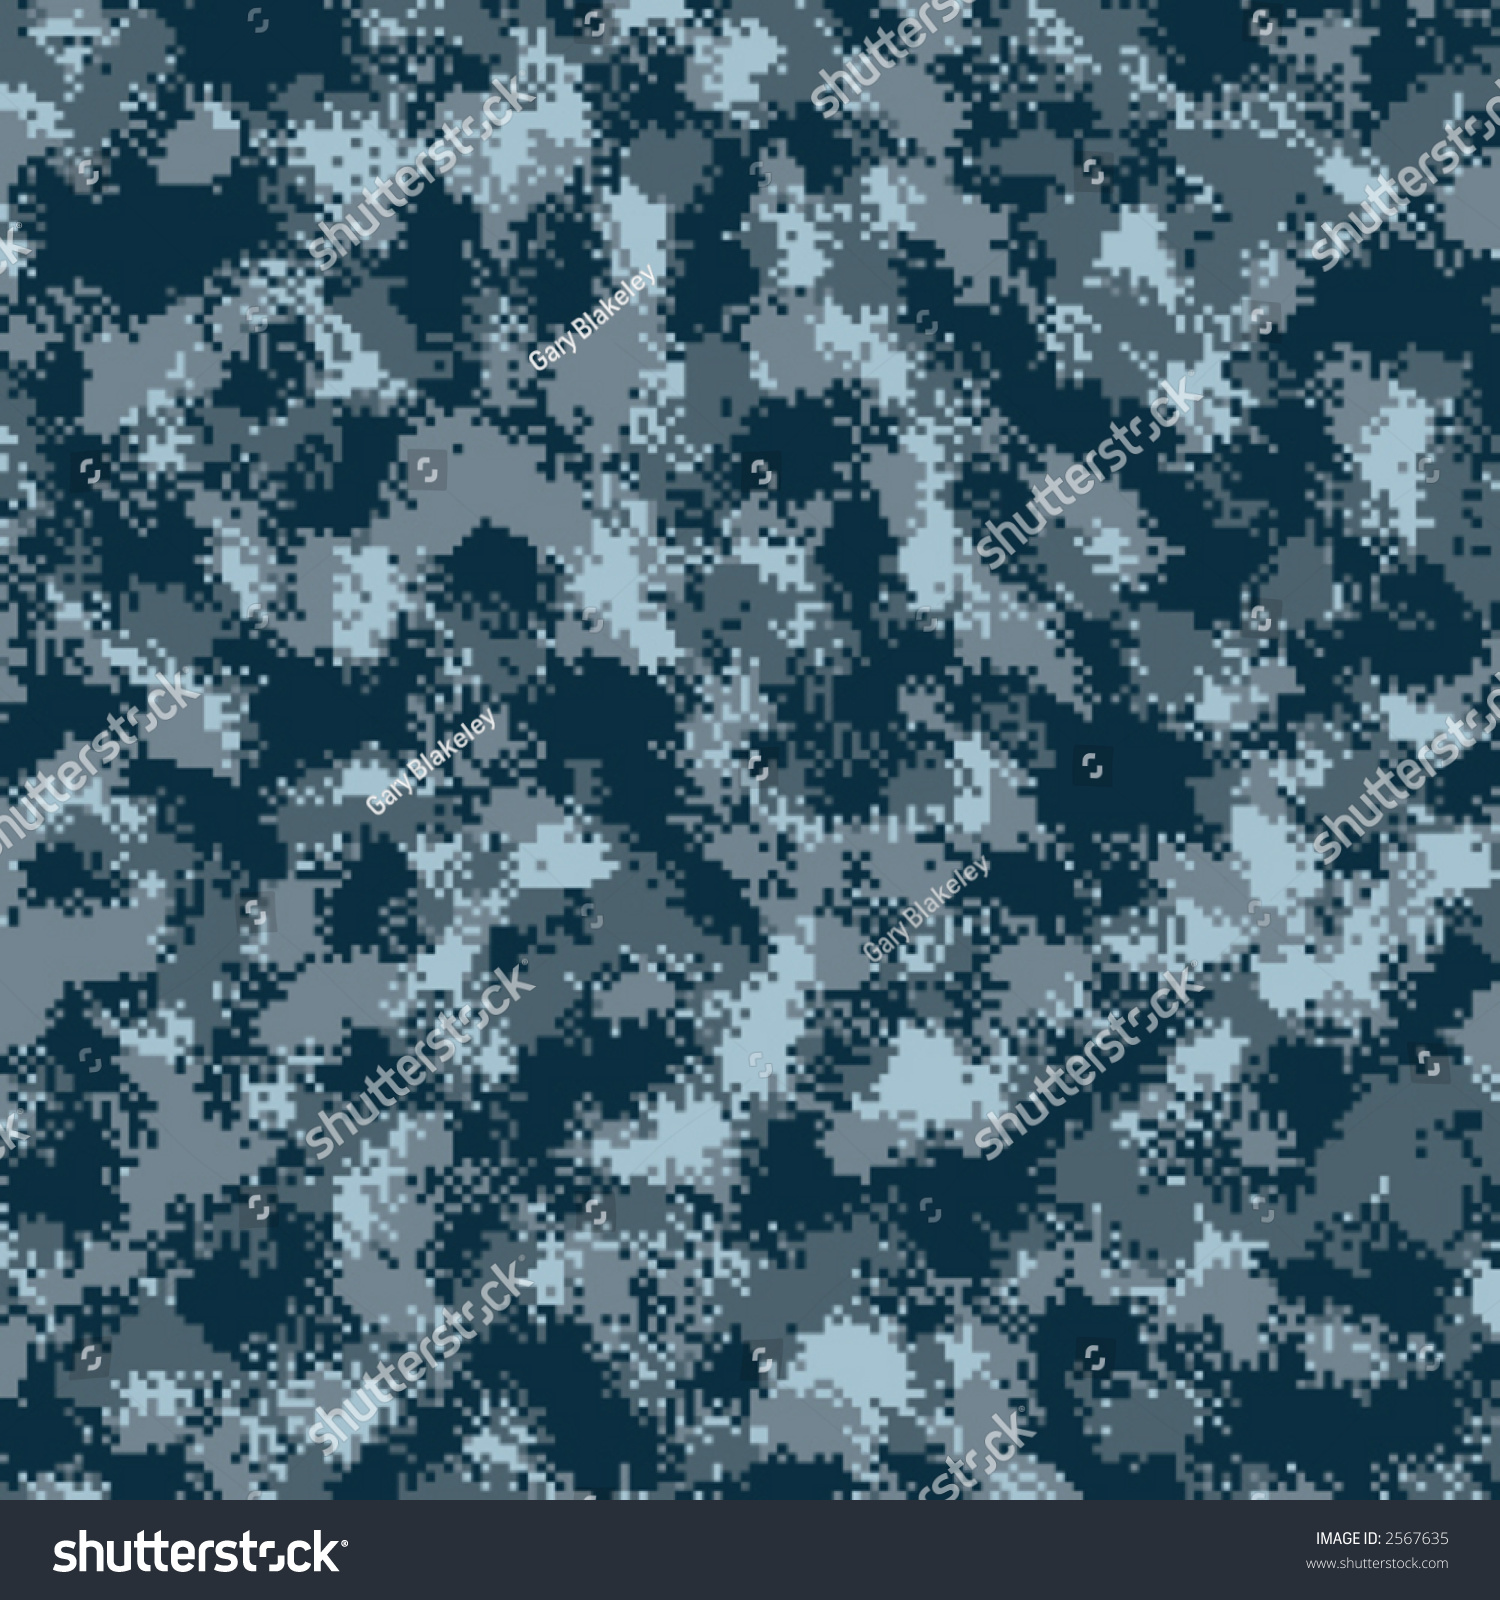 A Vector Drawing Based On The Newly Designed Cadpat/Marpat Pixel ...